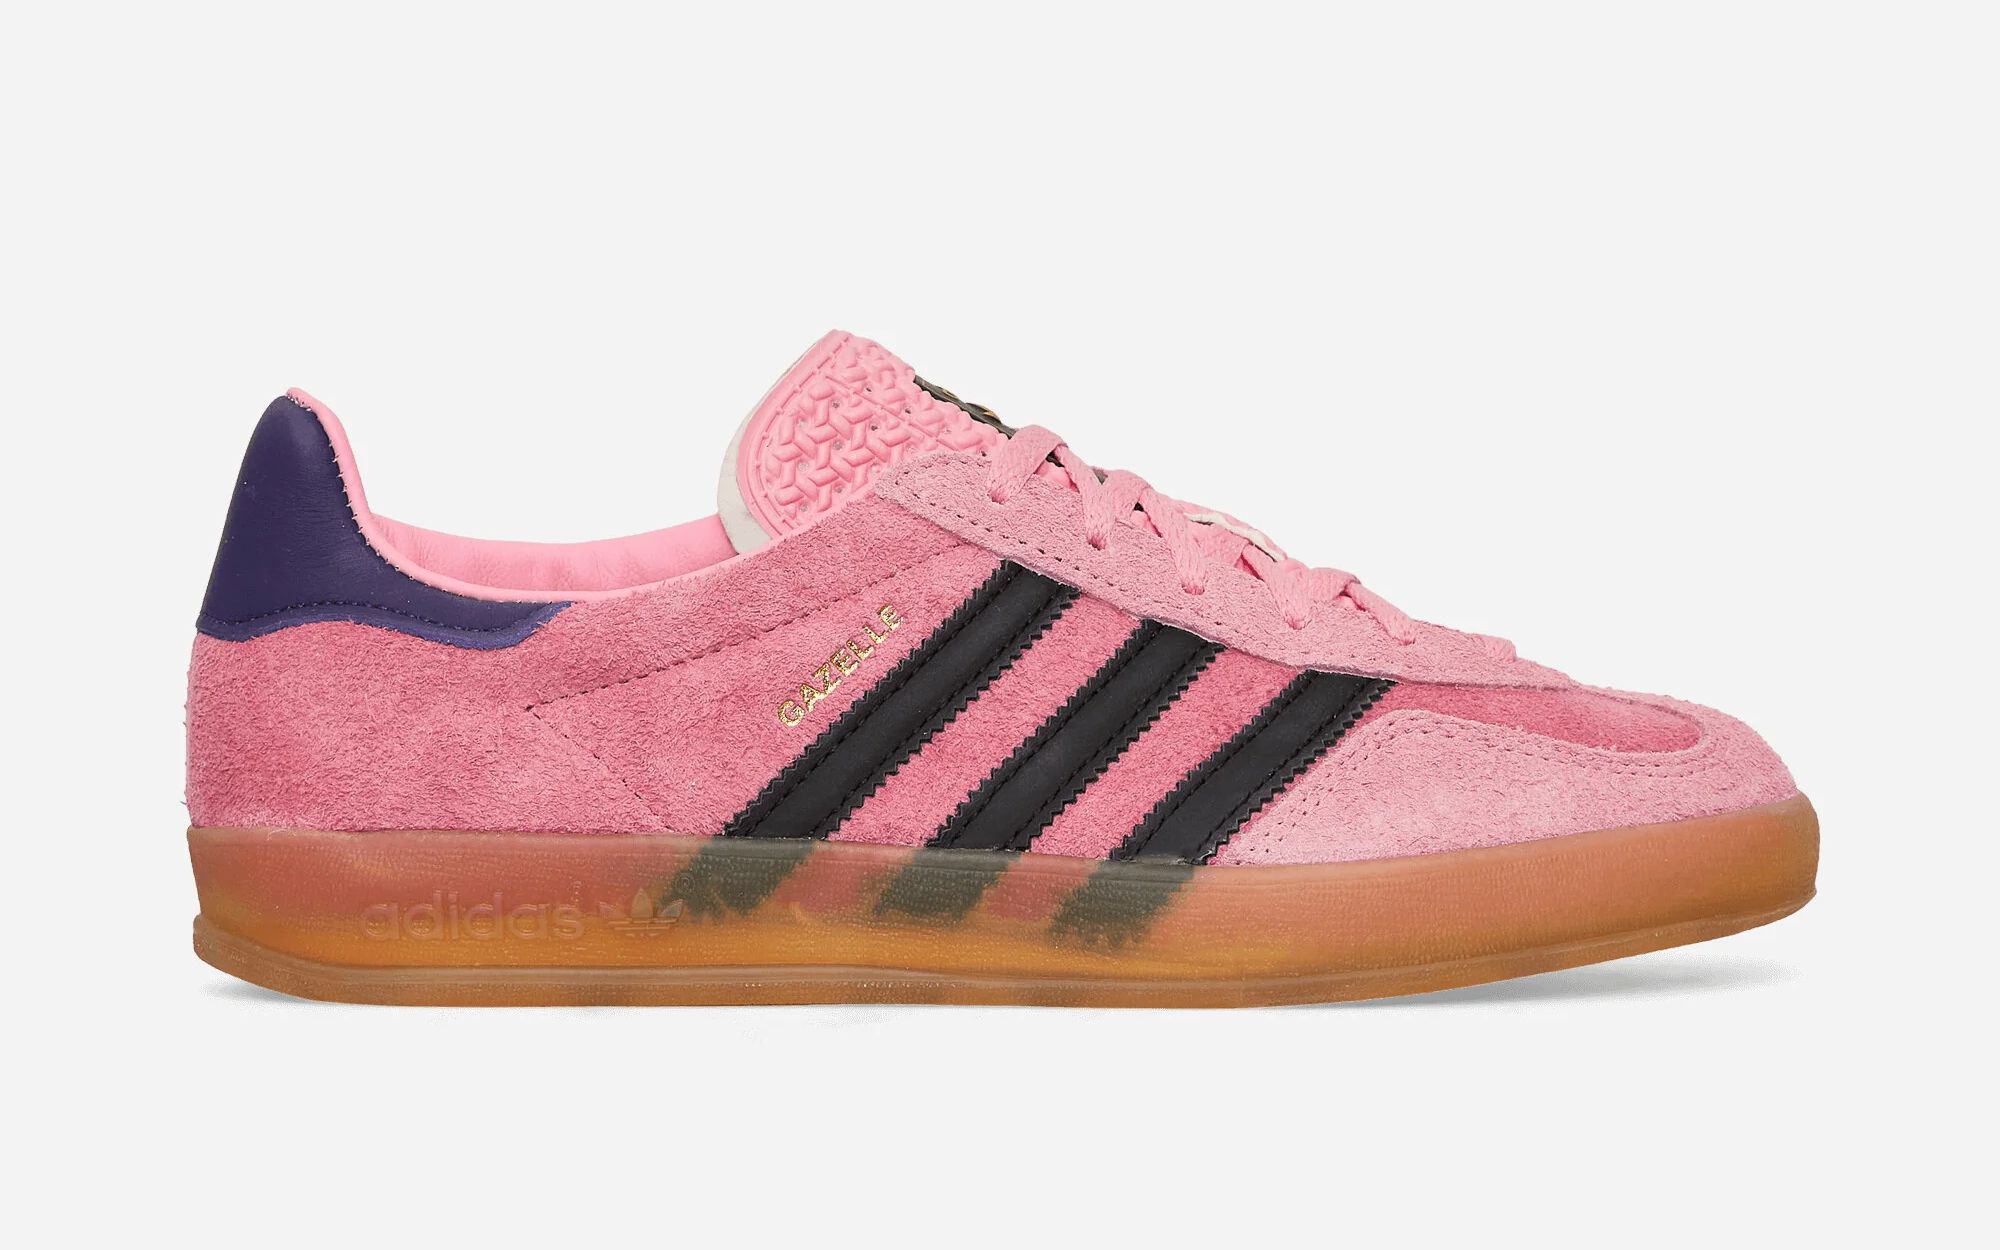 Adidas Gazelle Gallery: Shoes That Bring the Heat